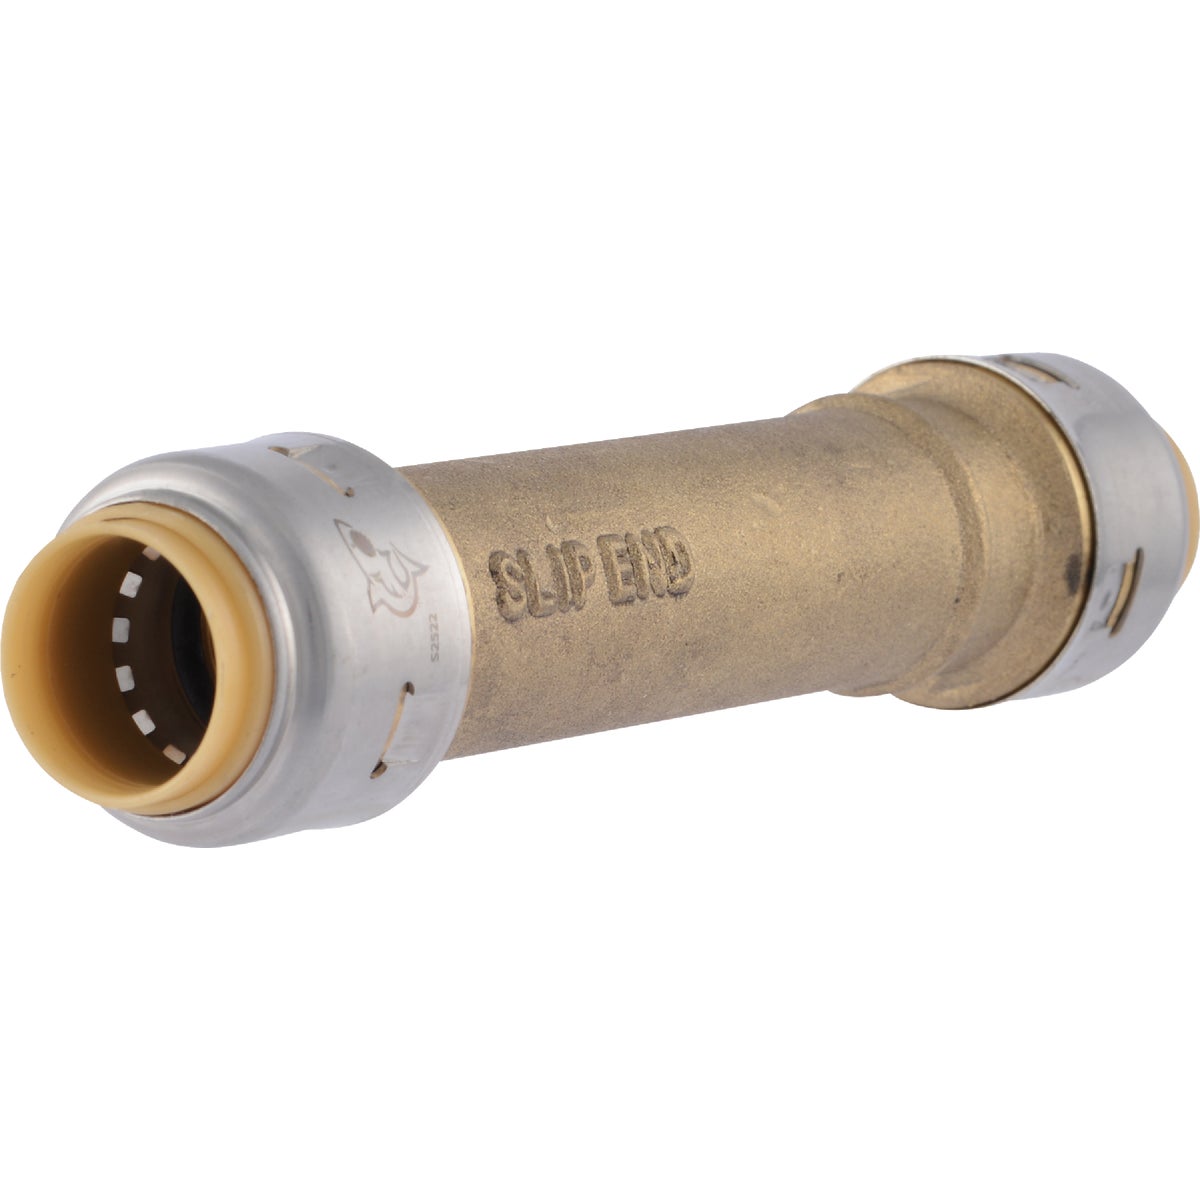 Item 461887, SharkBite Max push-to-connect fittings allow you make pipe connections with